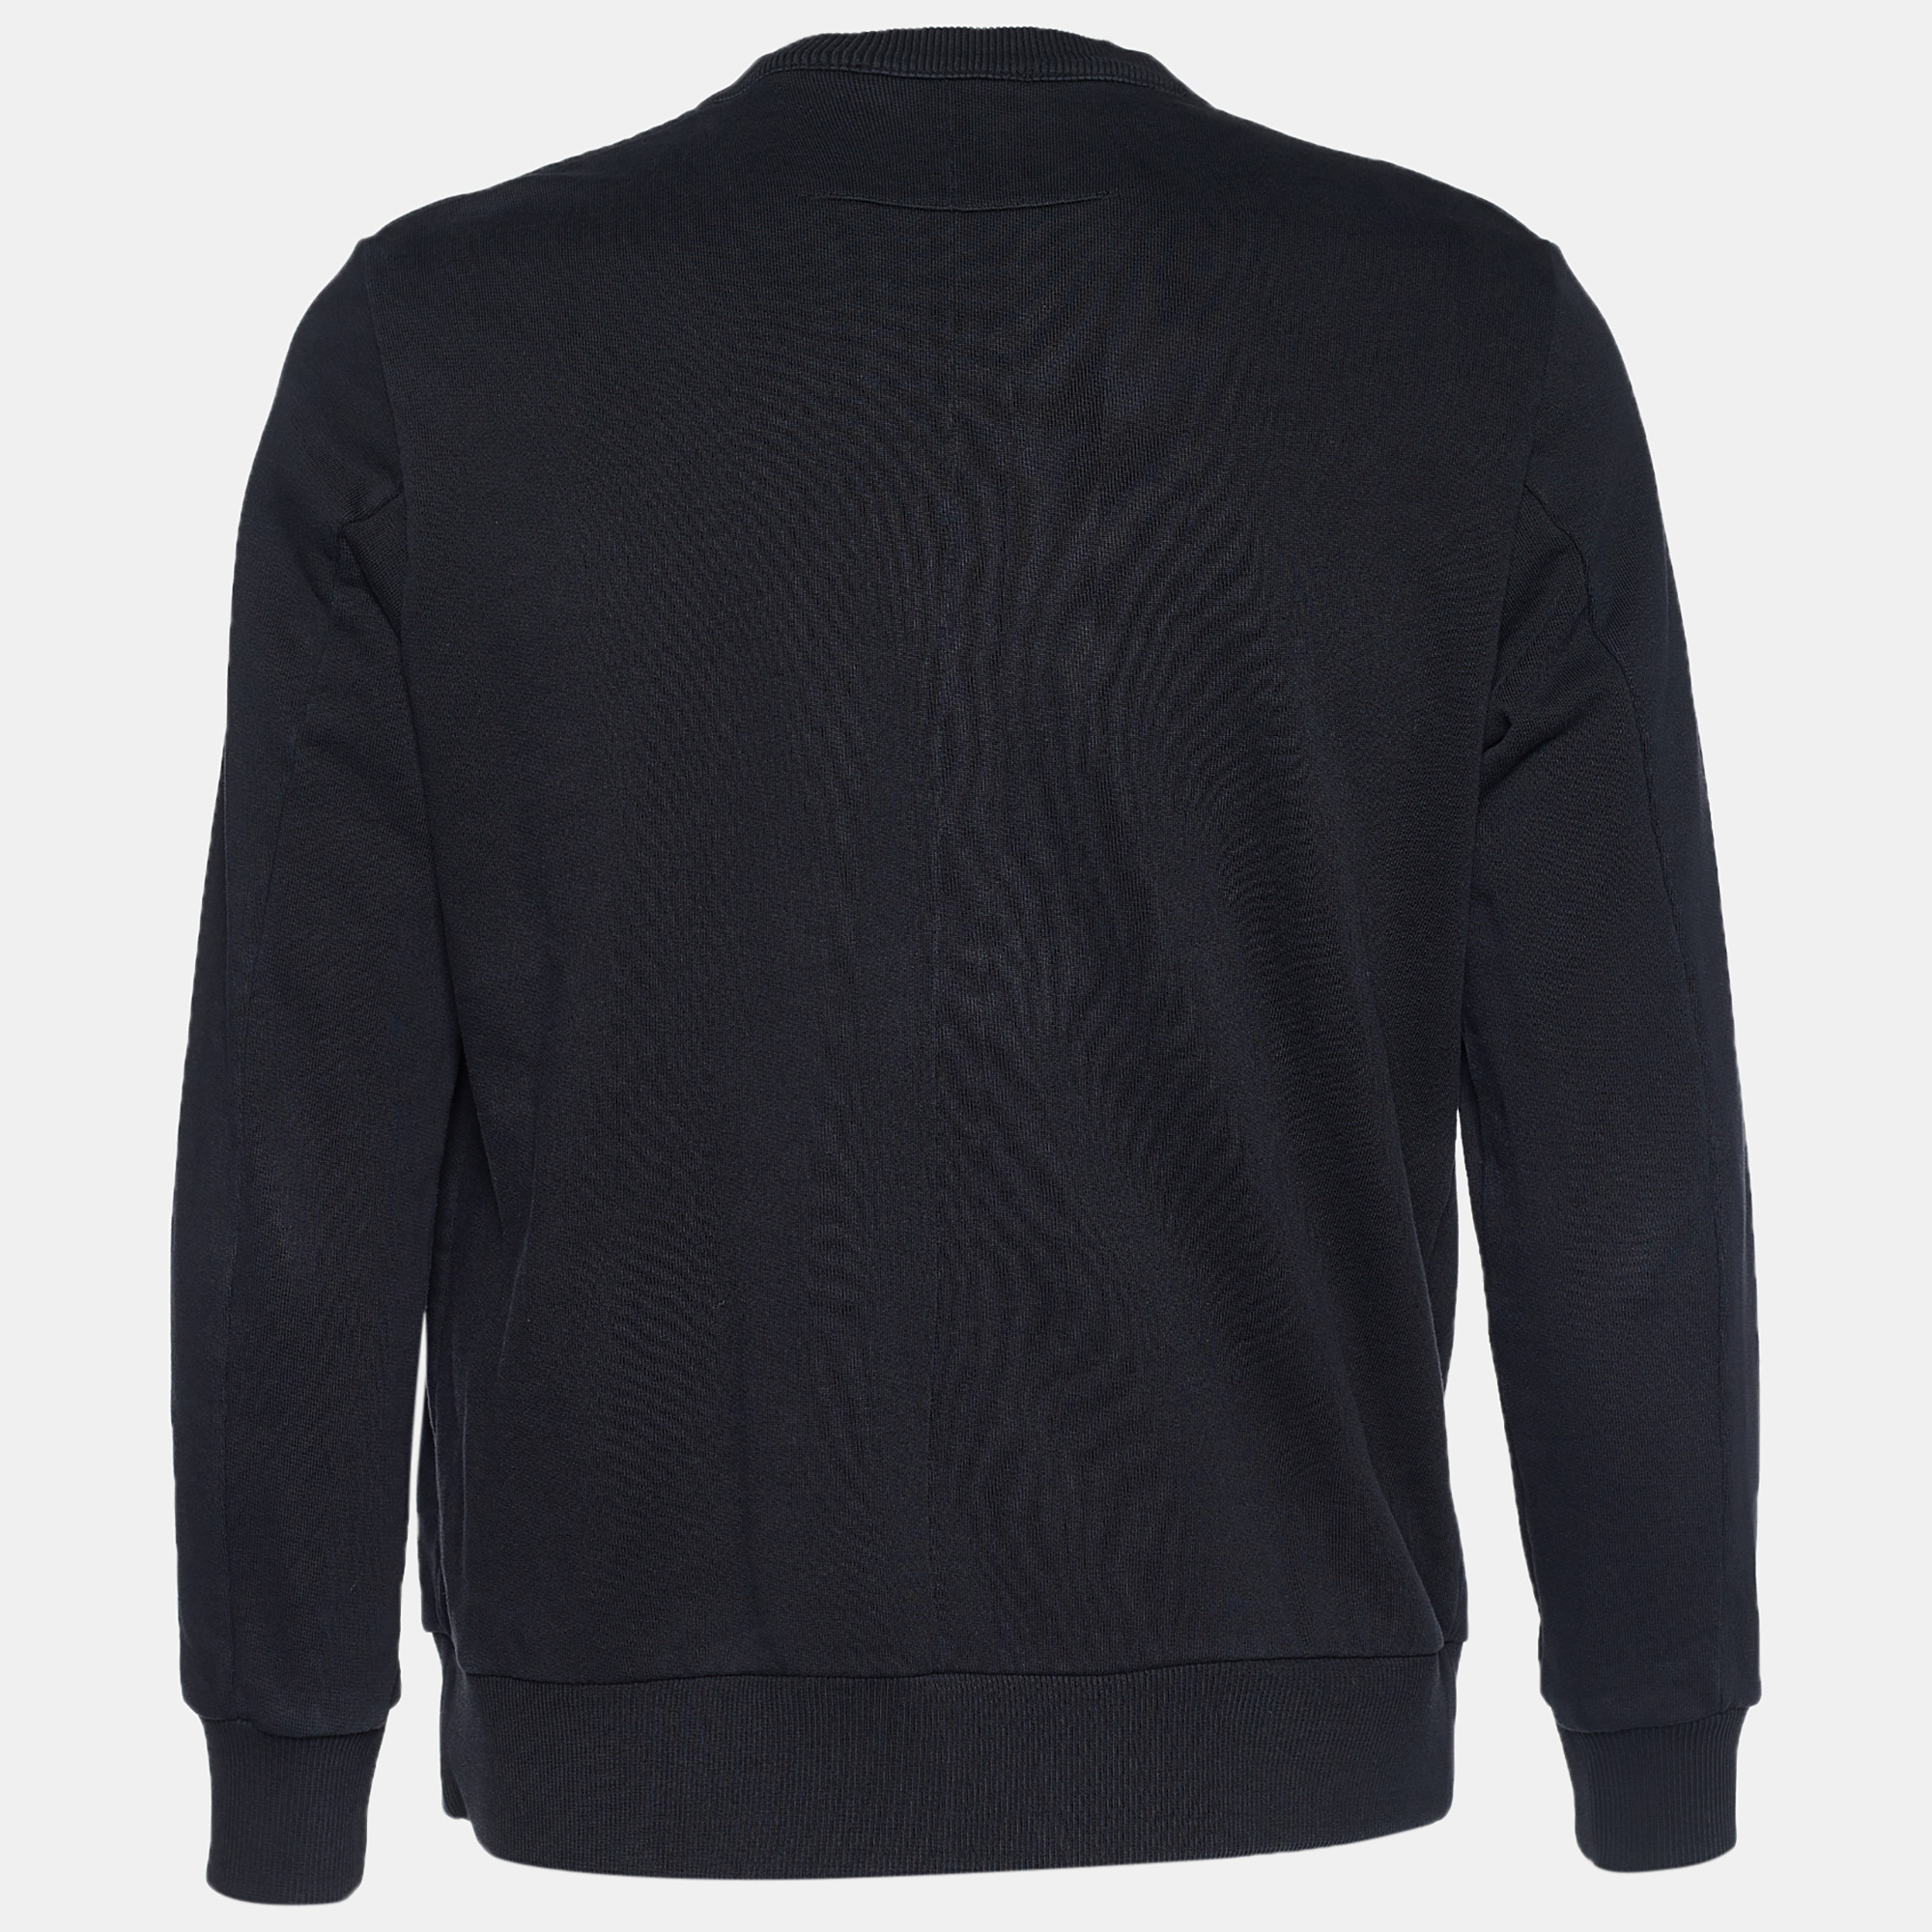 

Givenchy Black Terry Knit 4G Applique Sweatshirt